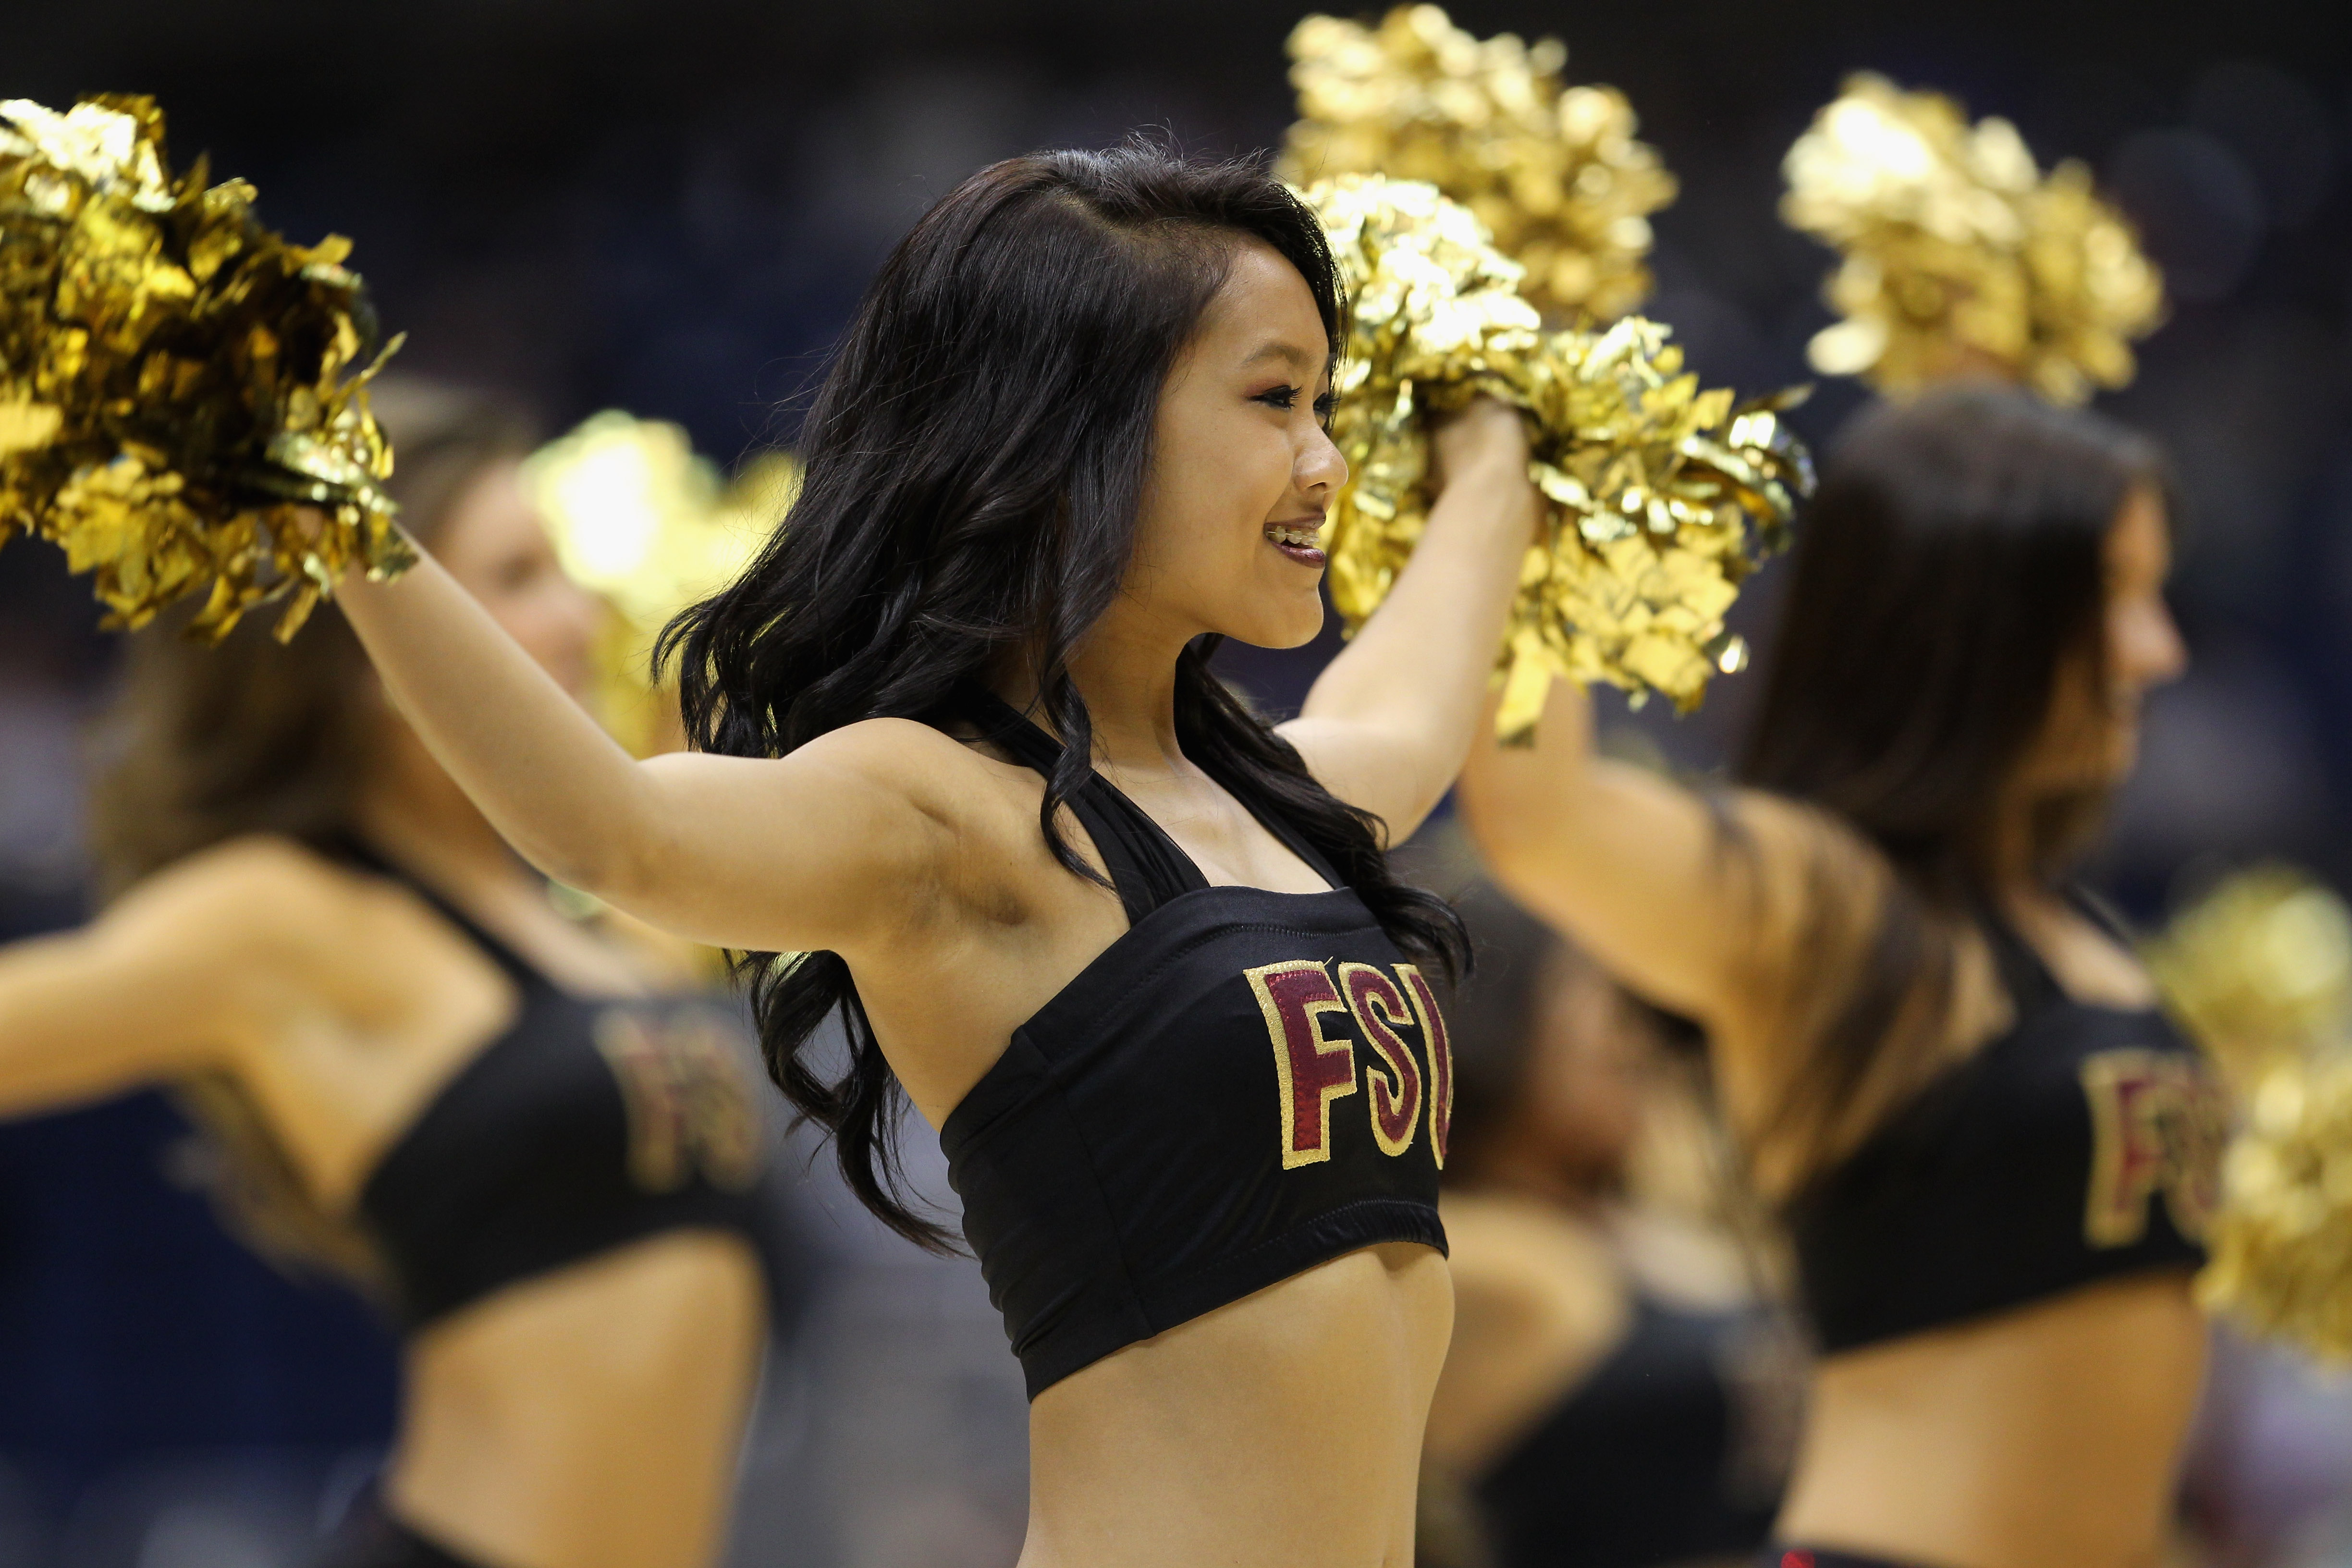 SAN ANTONIO, TX - MARCH 25:  Florida State Seminoles cheerleaders perform during the southwest regional of the 2011 NCAA men's basketball tournament against the Virginia Commonwealth Rams at the Alamodome on March 25, 2011 in San Antonio, Texas. Virginia